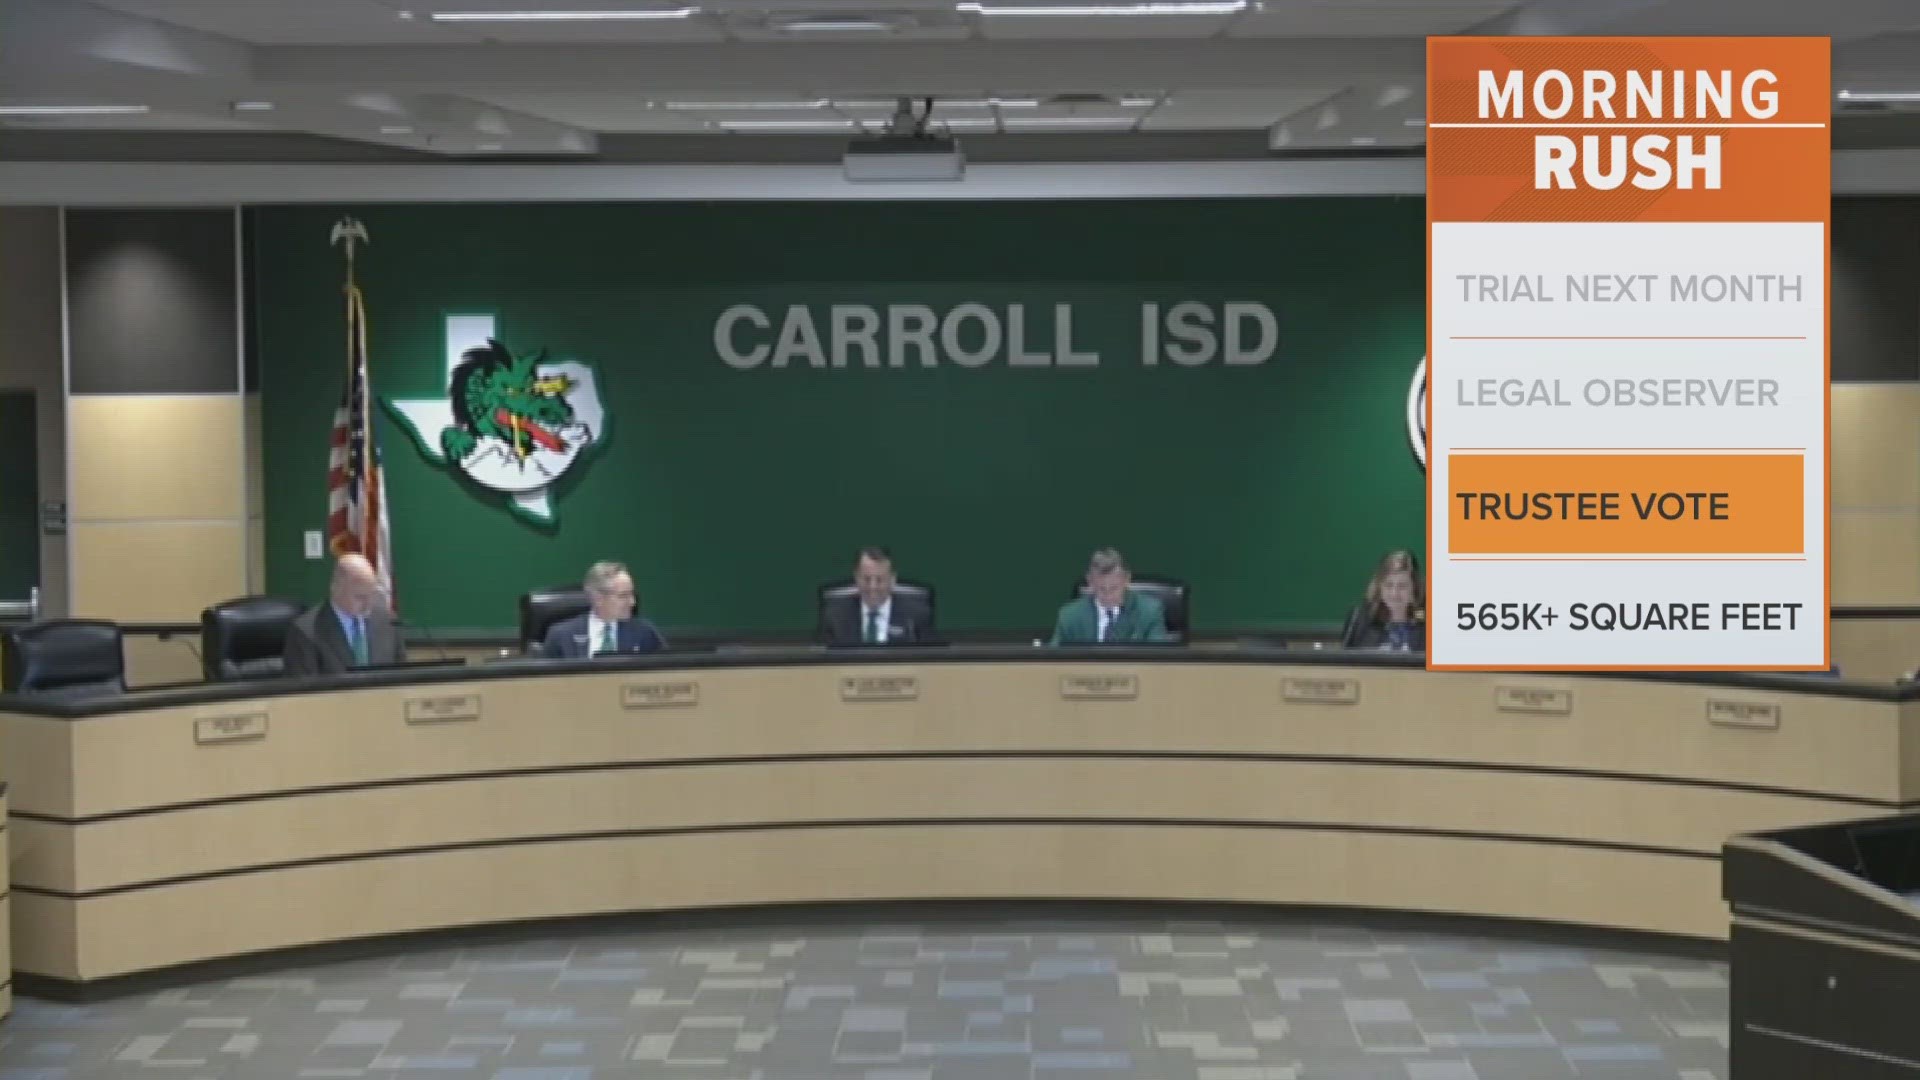 Carroll ISD voted to end its membership, becoming the first public school district in the state to do so.